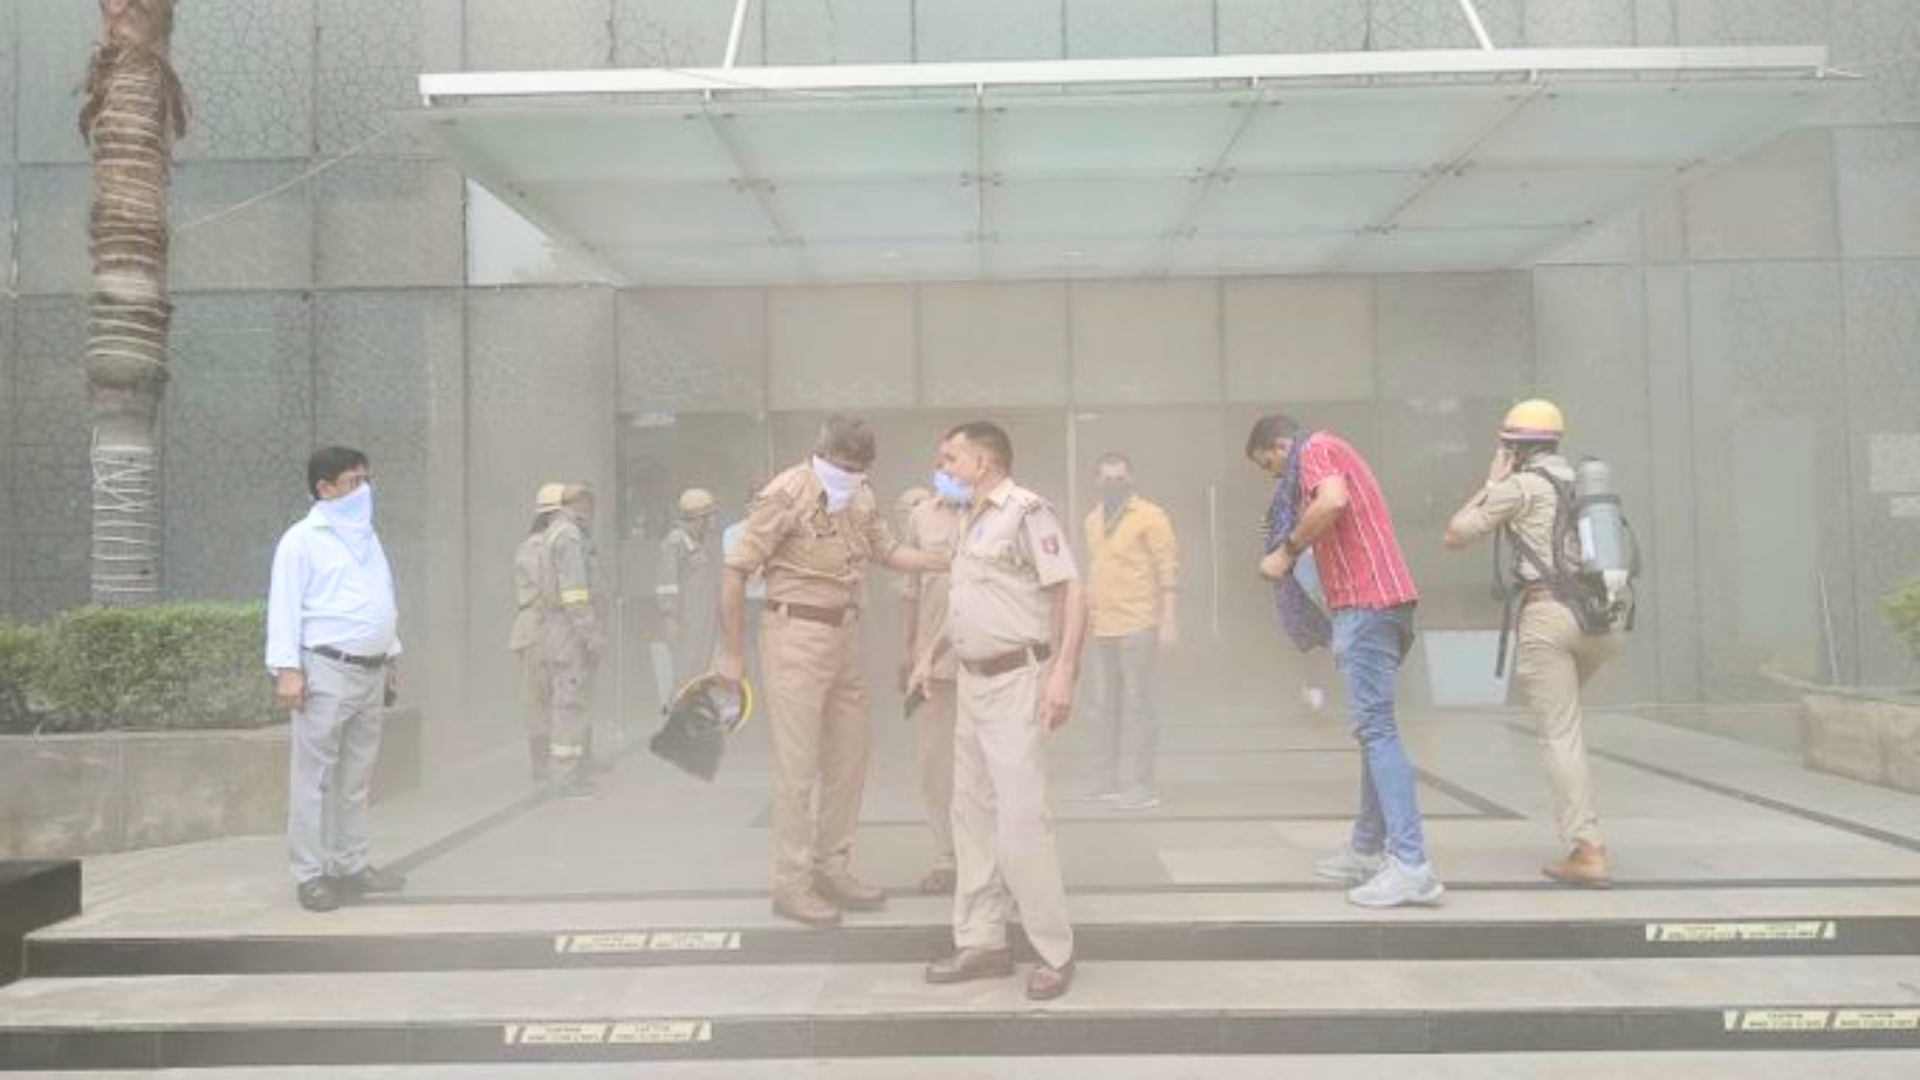 Uttar Pradesh: Fire Breaks Out At Noida’s Logix Mall, No Casualties Reported